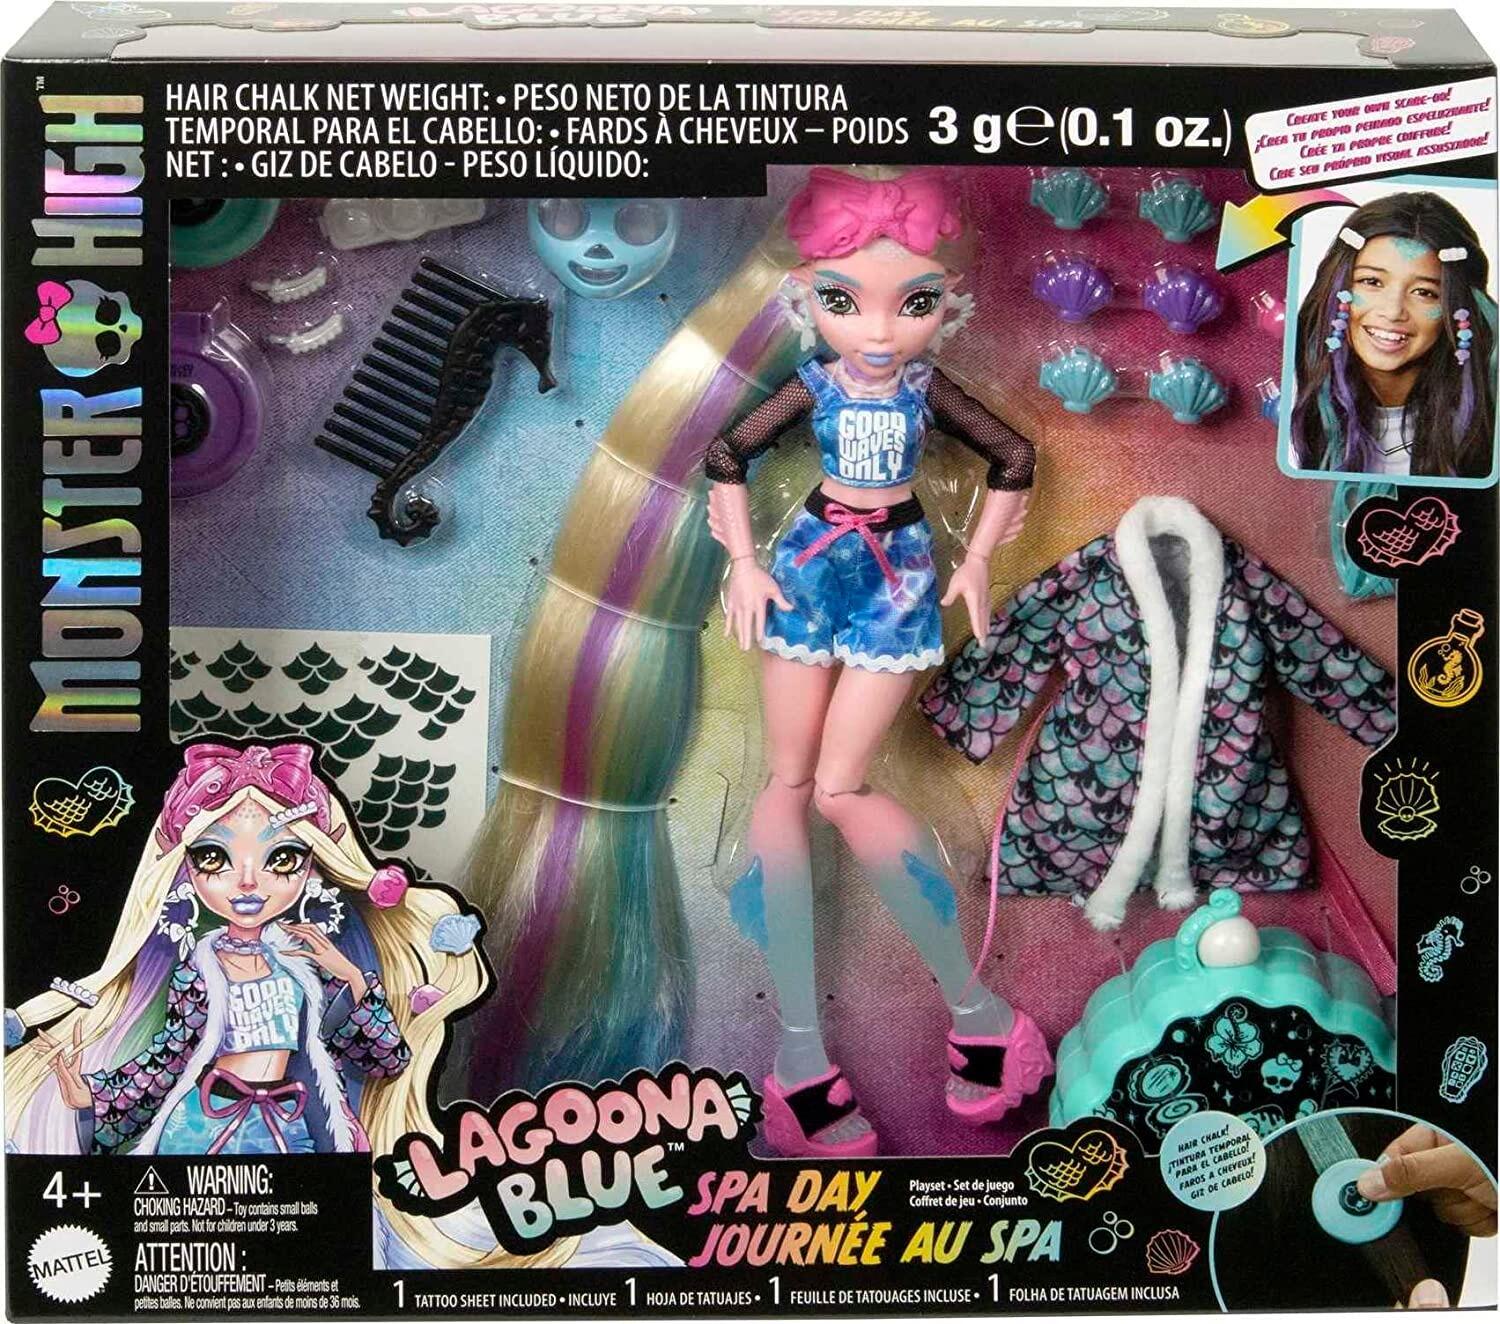 Monster High Doll, Lagoona Blue, Spa Day Set, Bentzens, toy, collectible, doll, playset